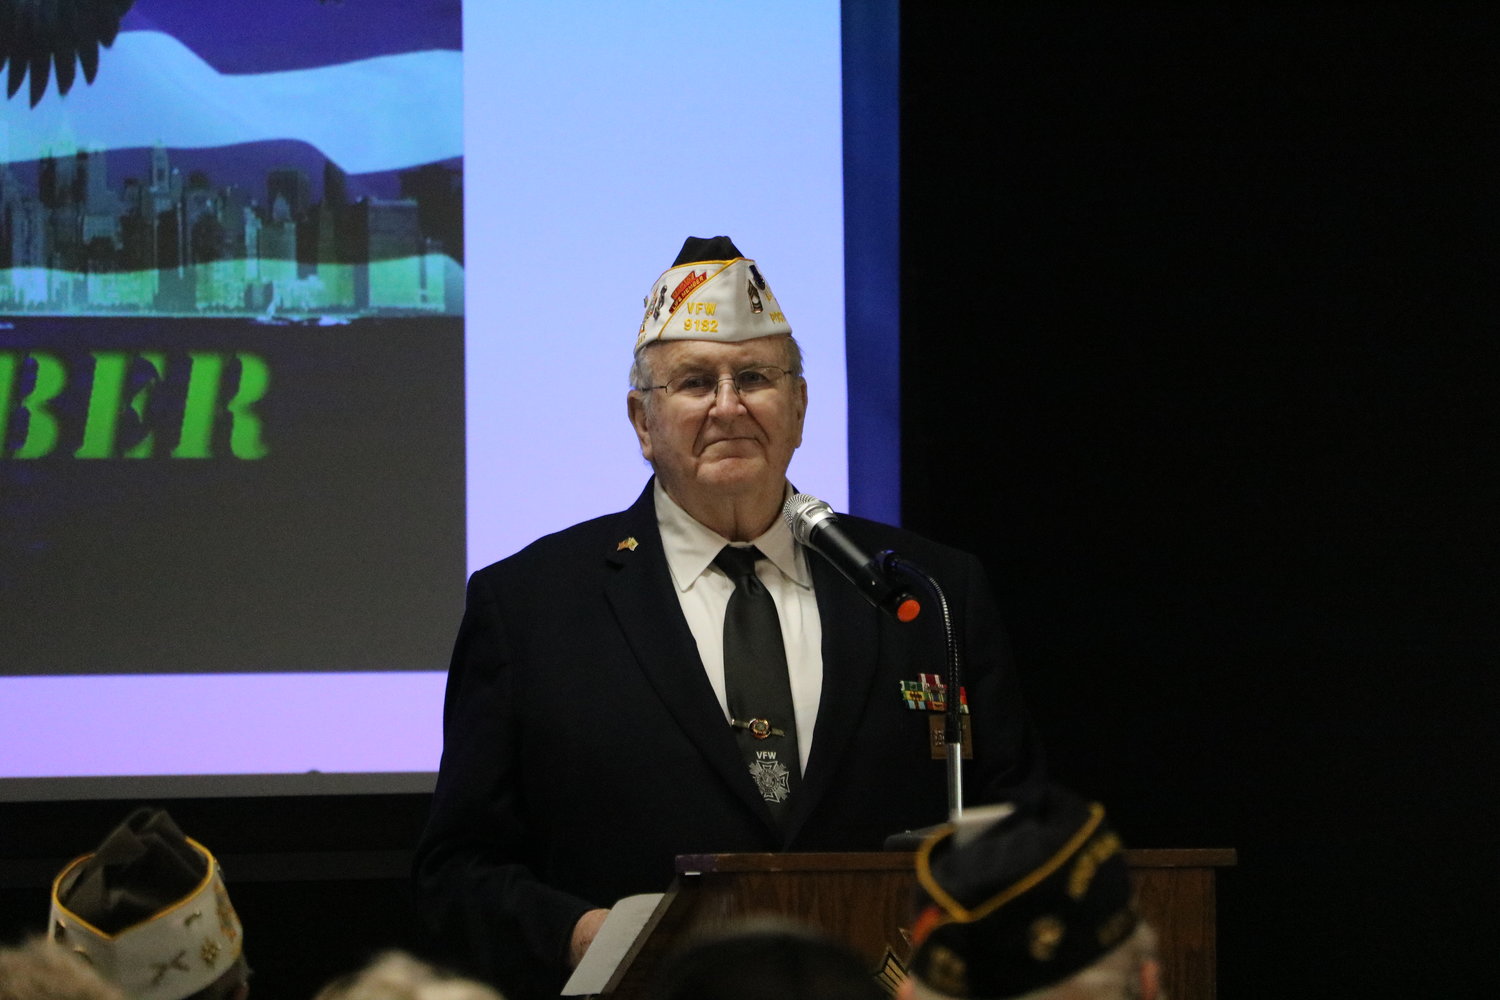 Don Byrne speaks during Saturday's 9/11 event at the Katy VFW.